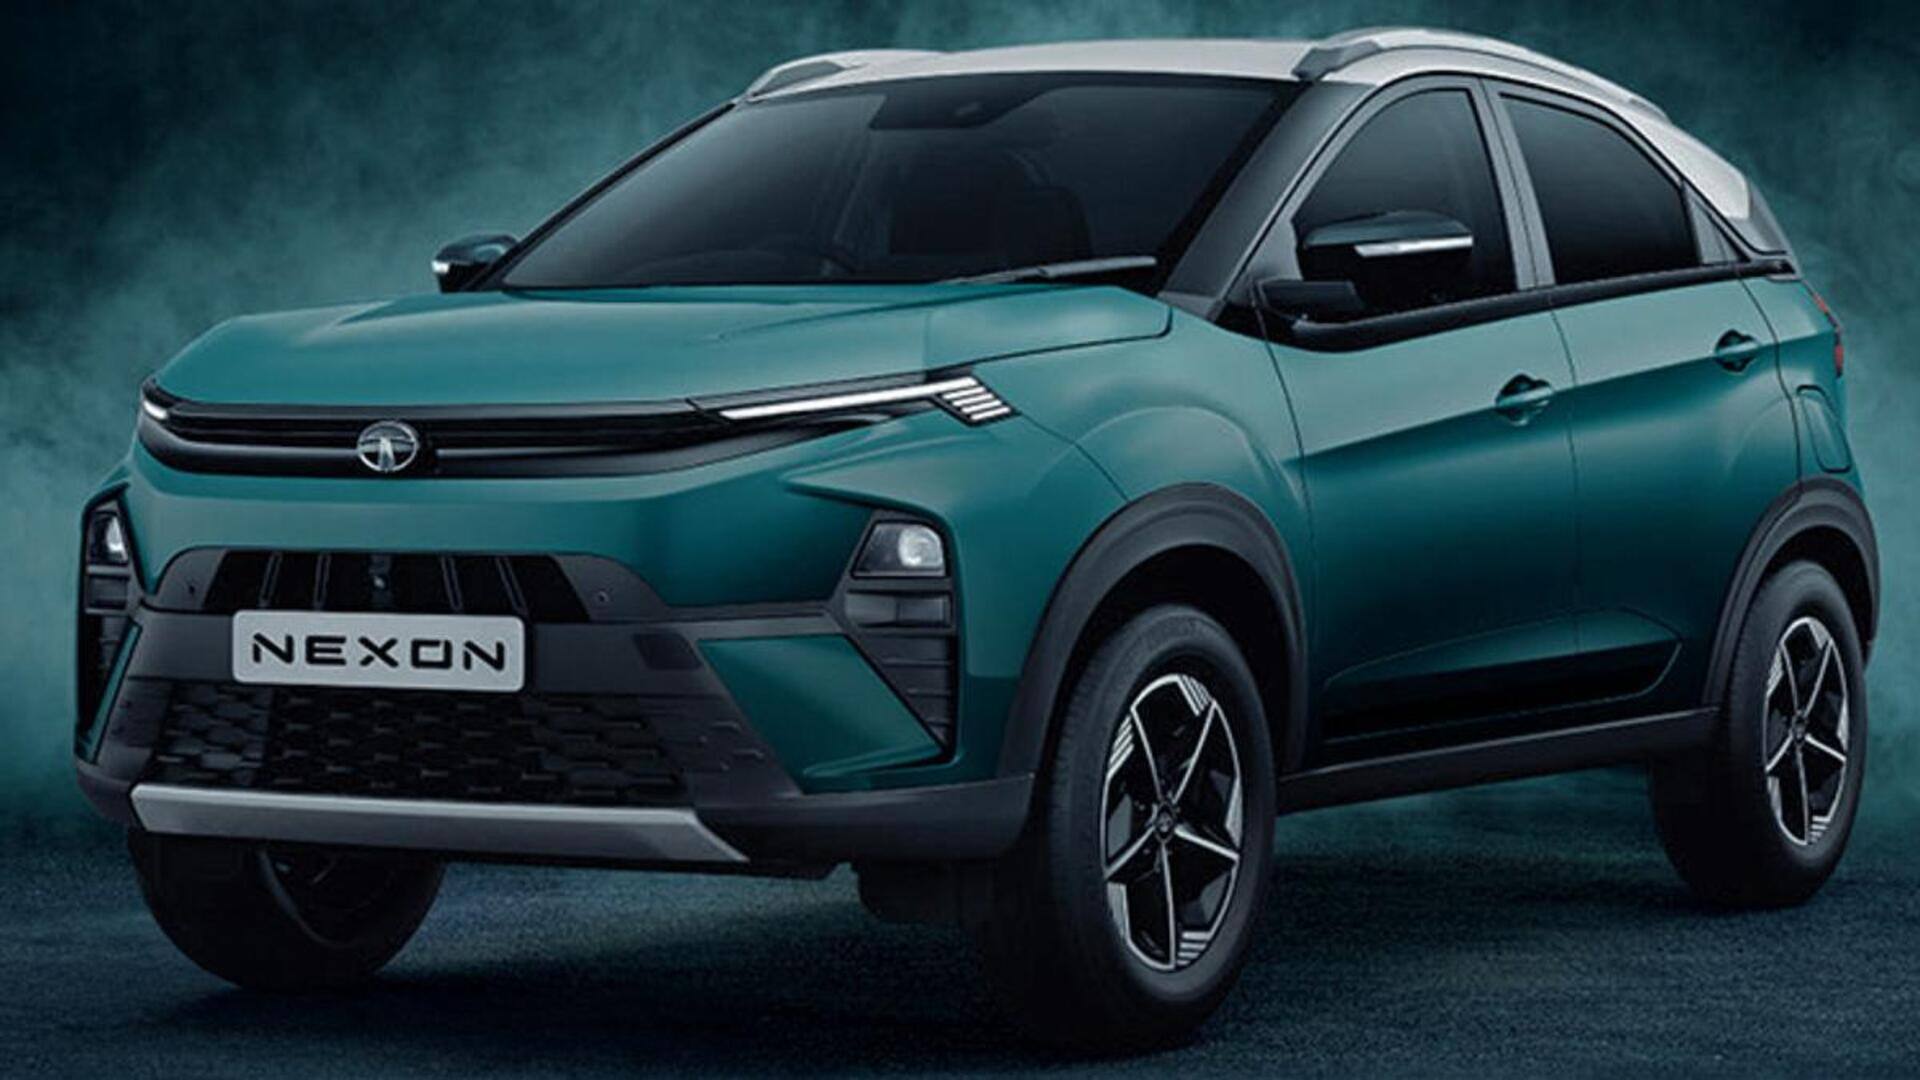 Tata Motors launches new entry-level variants for Nexon compact SUV